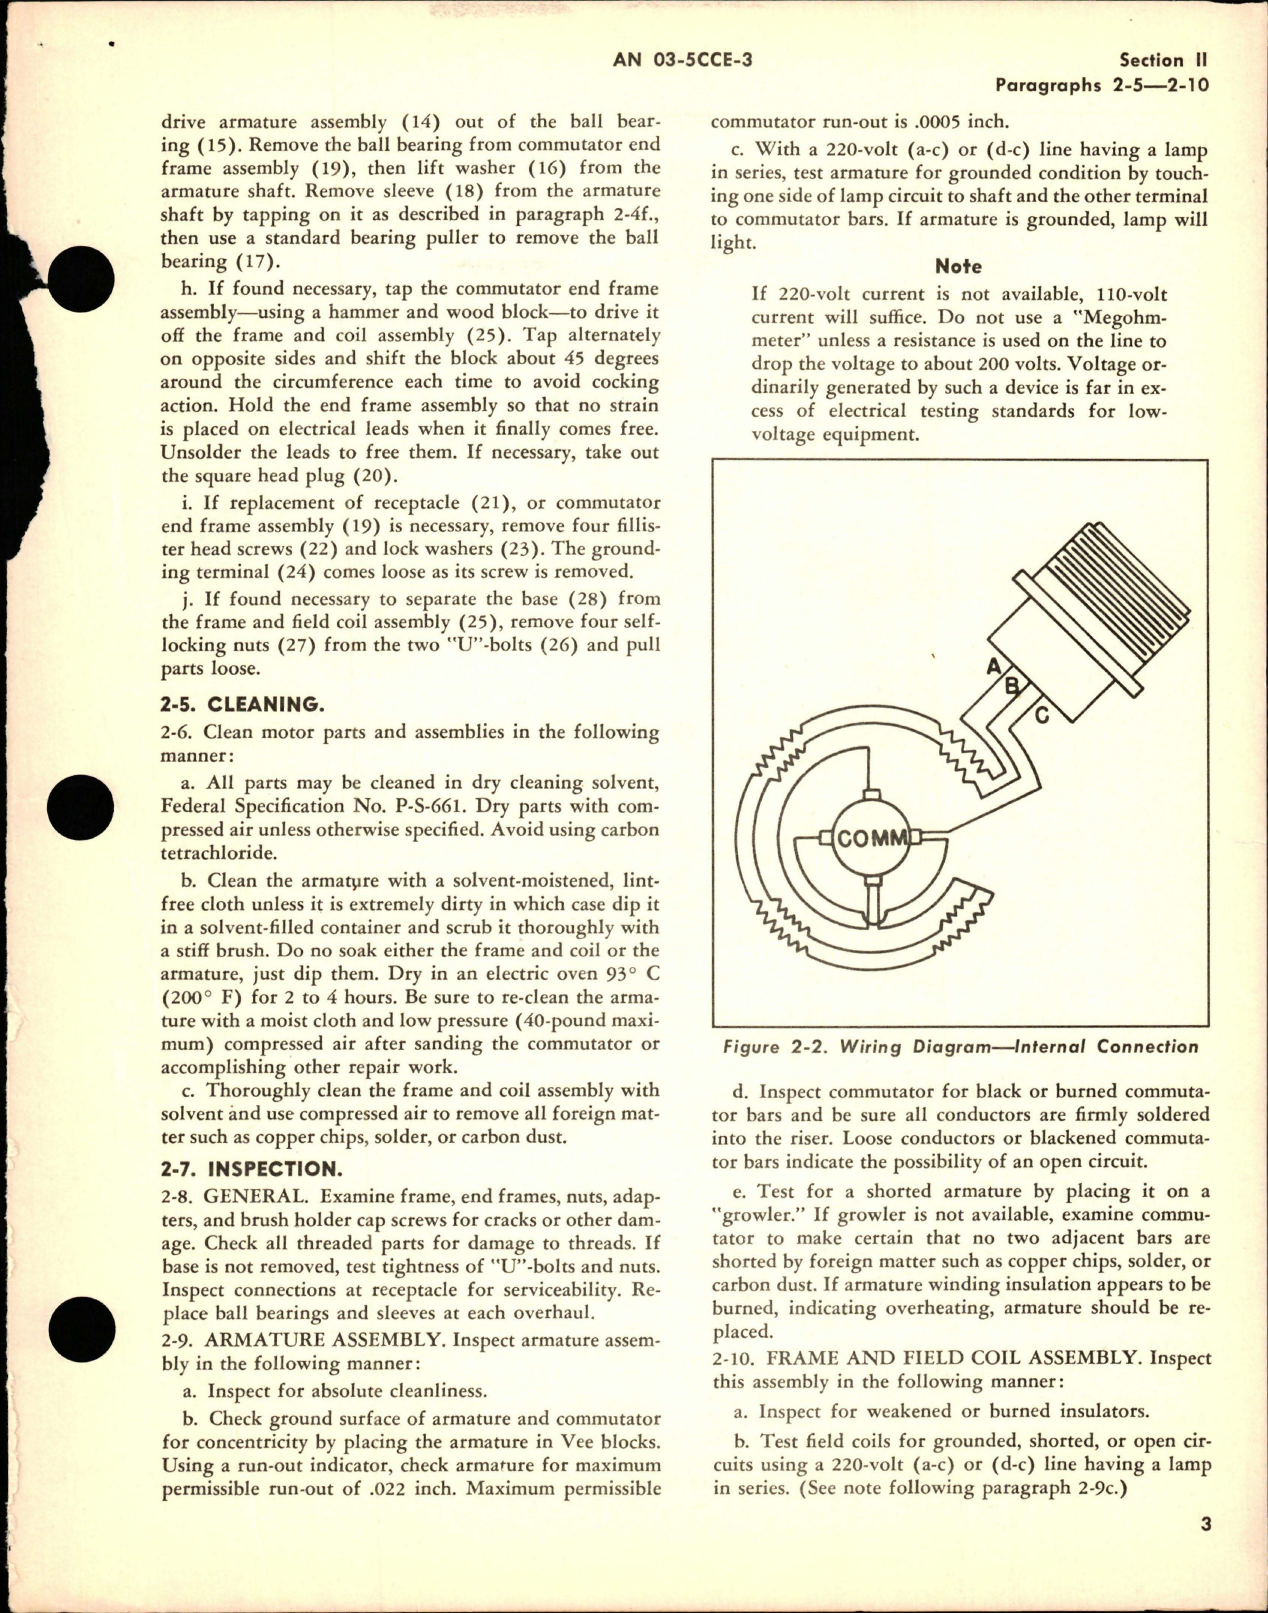 Sample page 5 from AirCorps Library document: Overhaul Instructions for Windshield Wiper Motors - A-7012 and A-7531